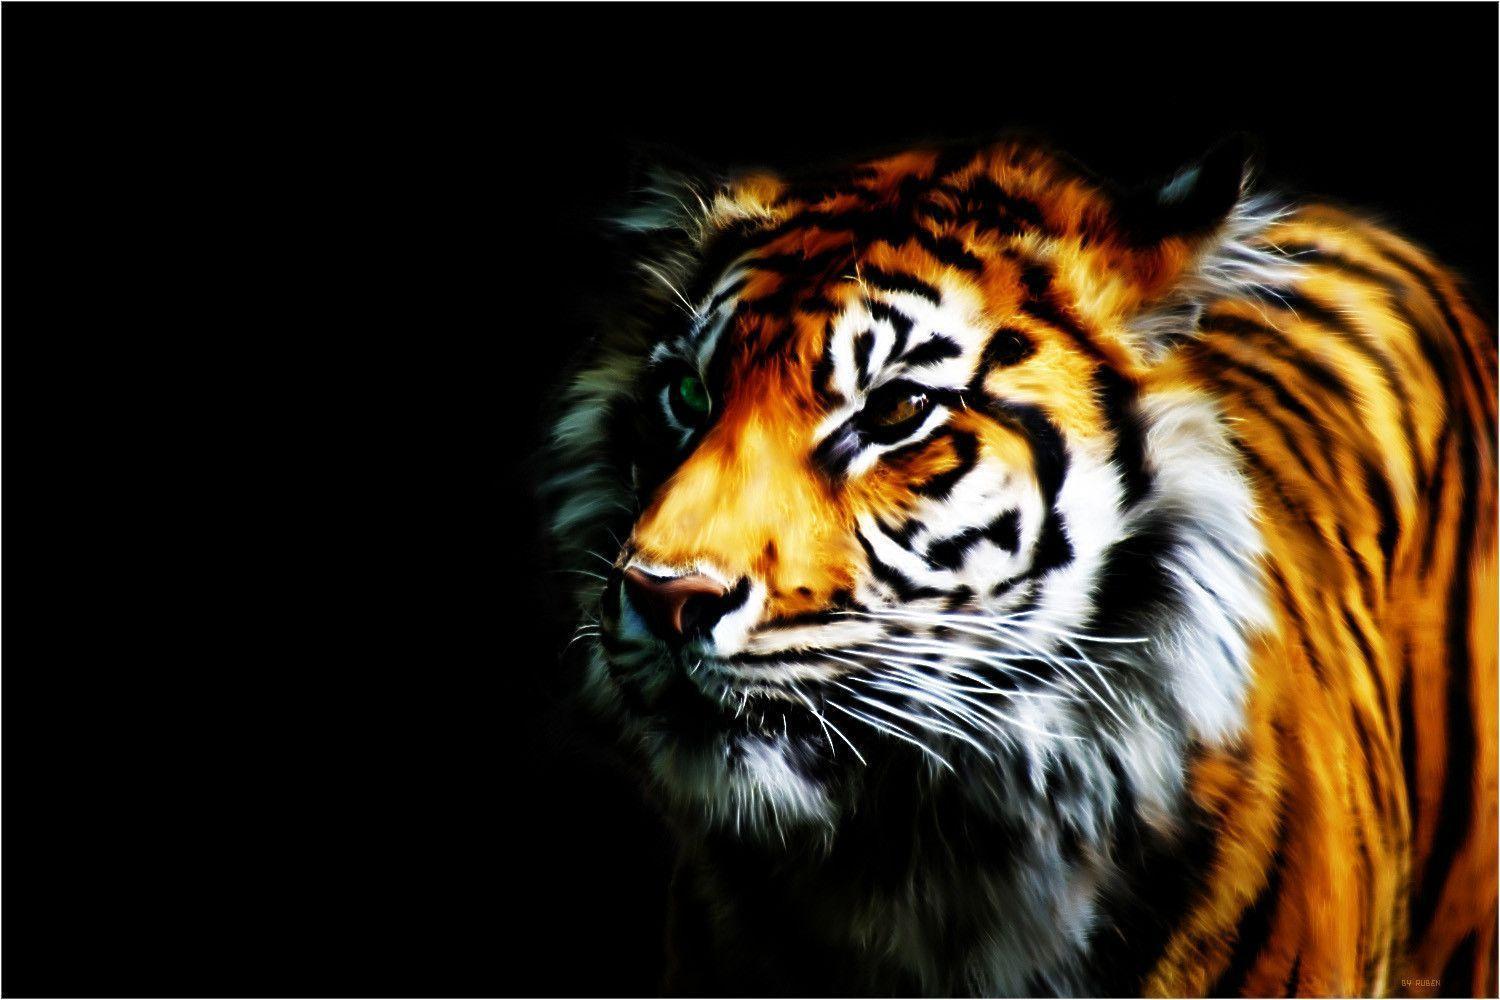 Cool Background Of Tigers Image & Picture